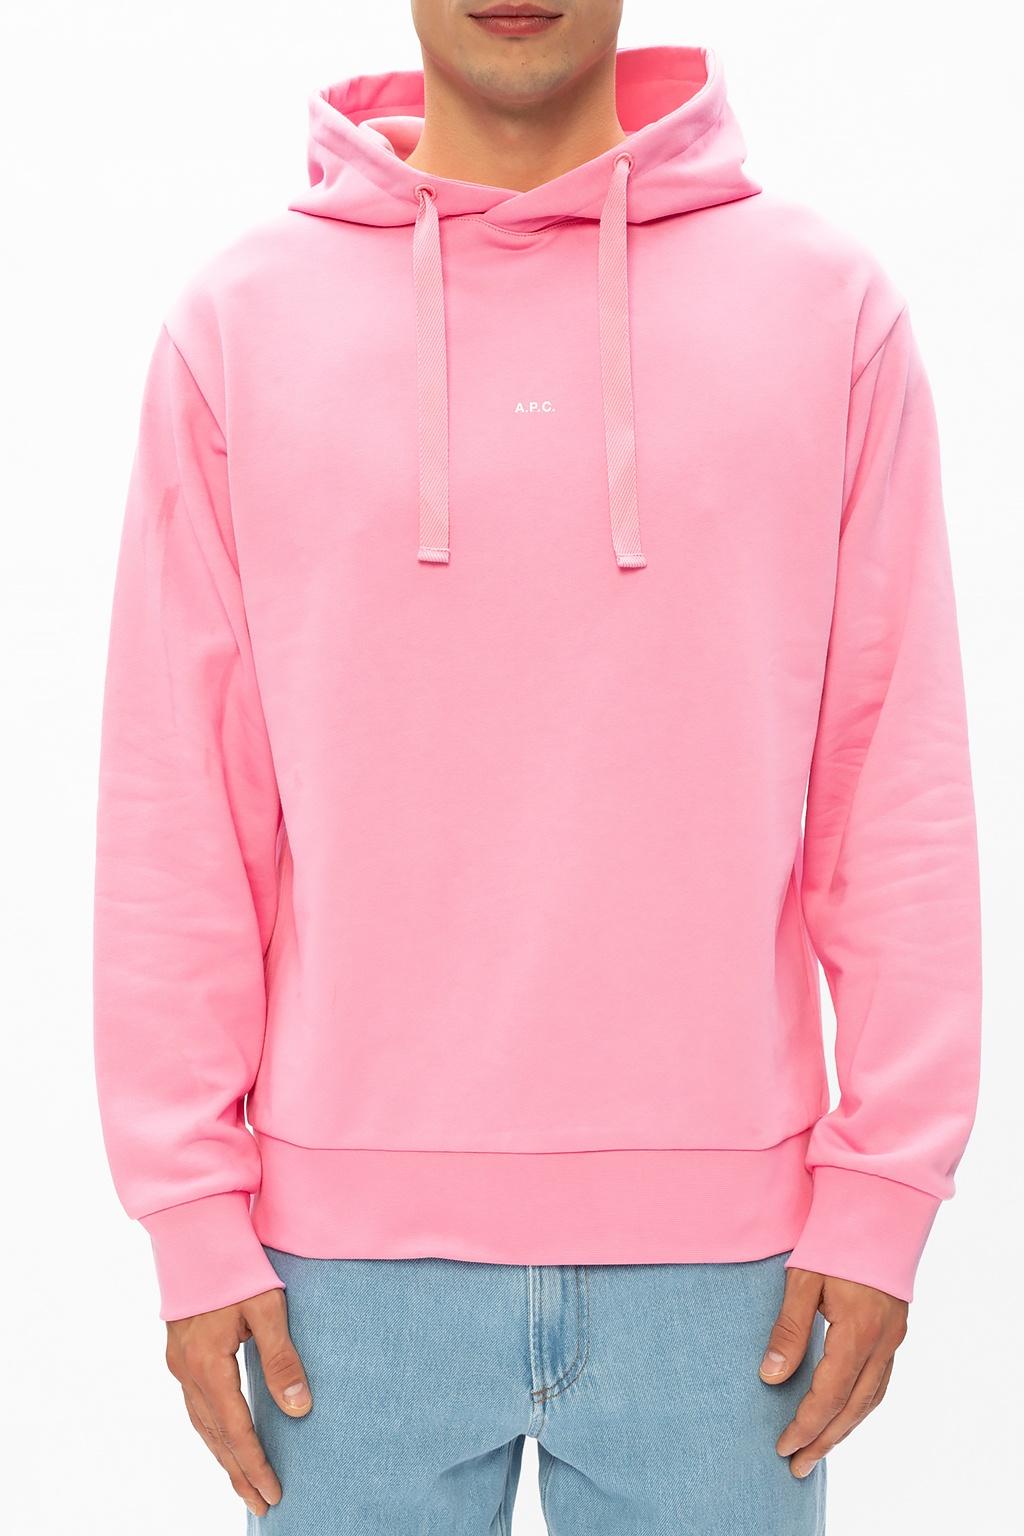 A.P.C. Cotton Logo Hoodie Pink for Men - Lyst